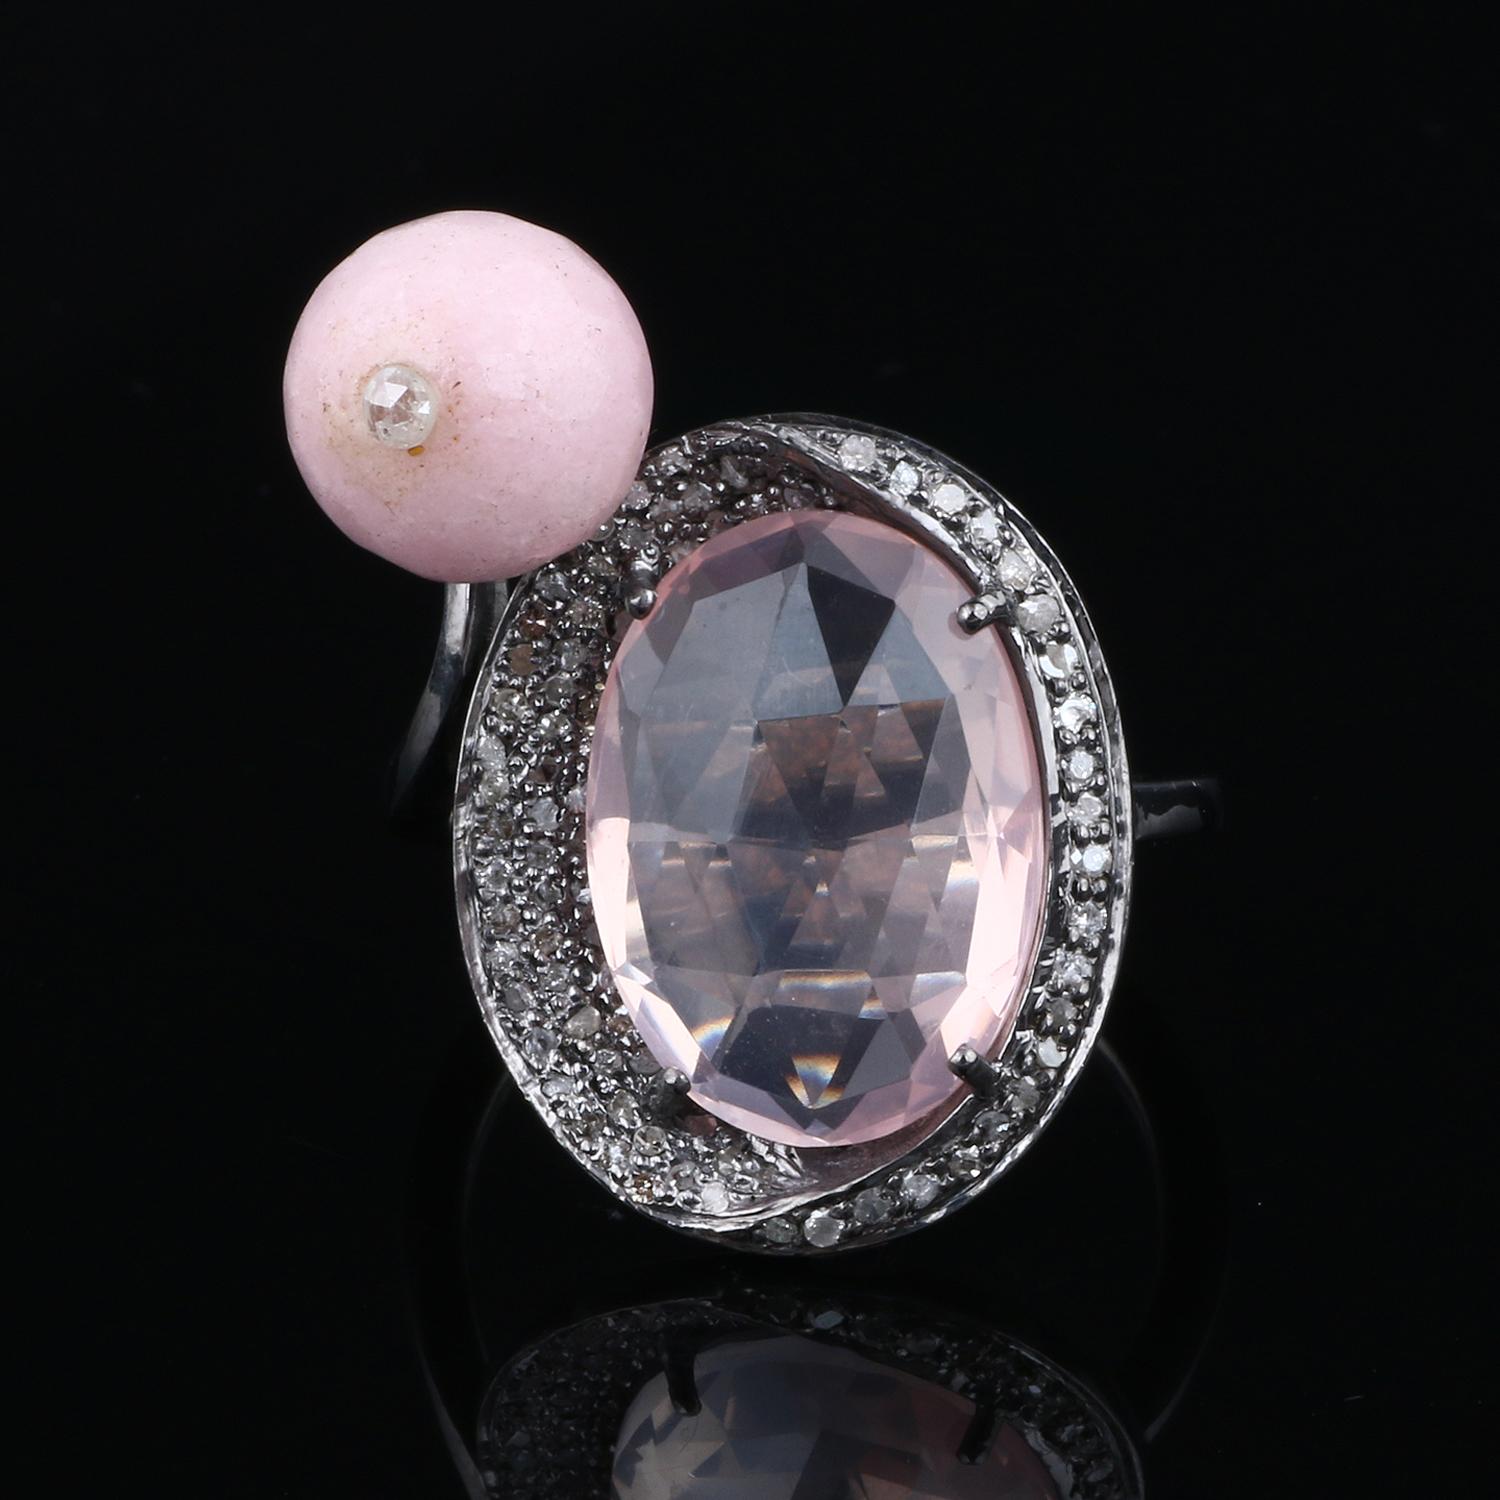 Item details:-

✦ SKU:- ESRG00202

✦ Material :- Silver
✦ Gemstone Specification:-
✧ Diamond
✧ Rose Quartz, Opal

✦ Approx. Diamond Weight : 0.55
✦ Approx. Silver Weight : 5.22
✦ Approx. Gross Weight : 9.15

Ring Size (US): 7

You will Get the same